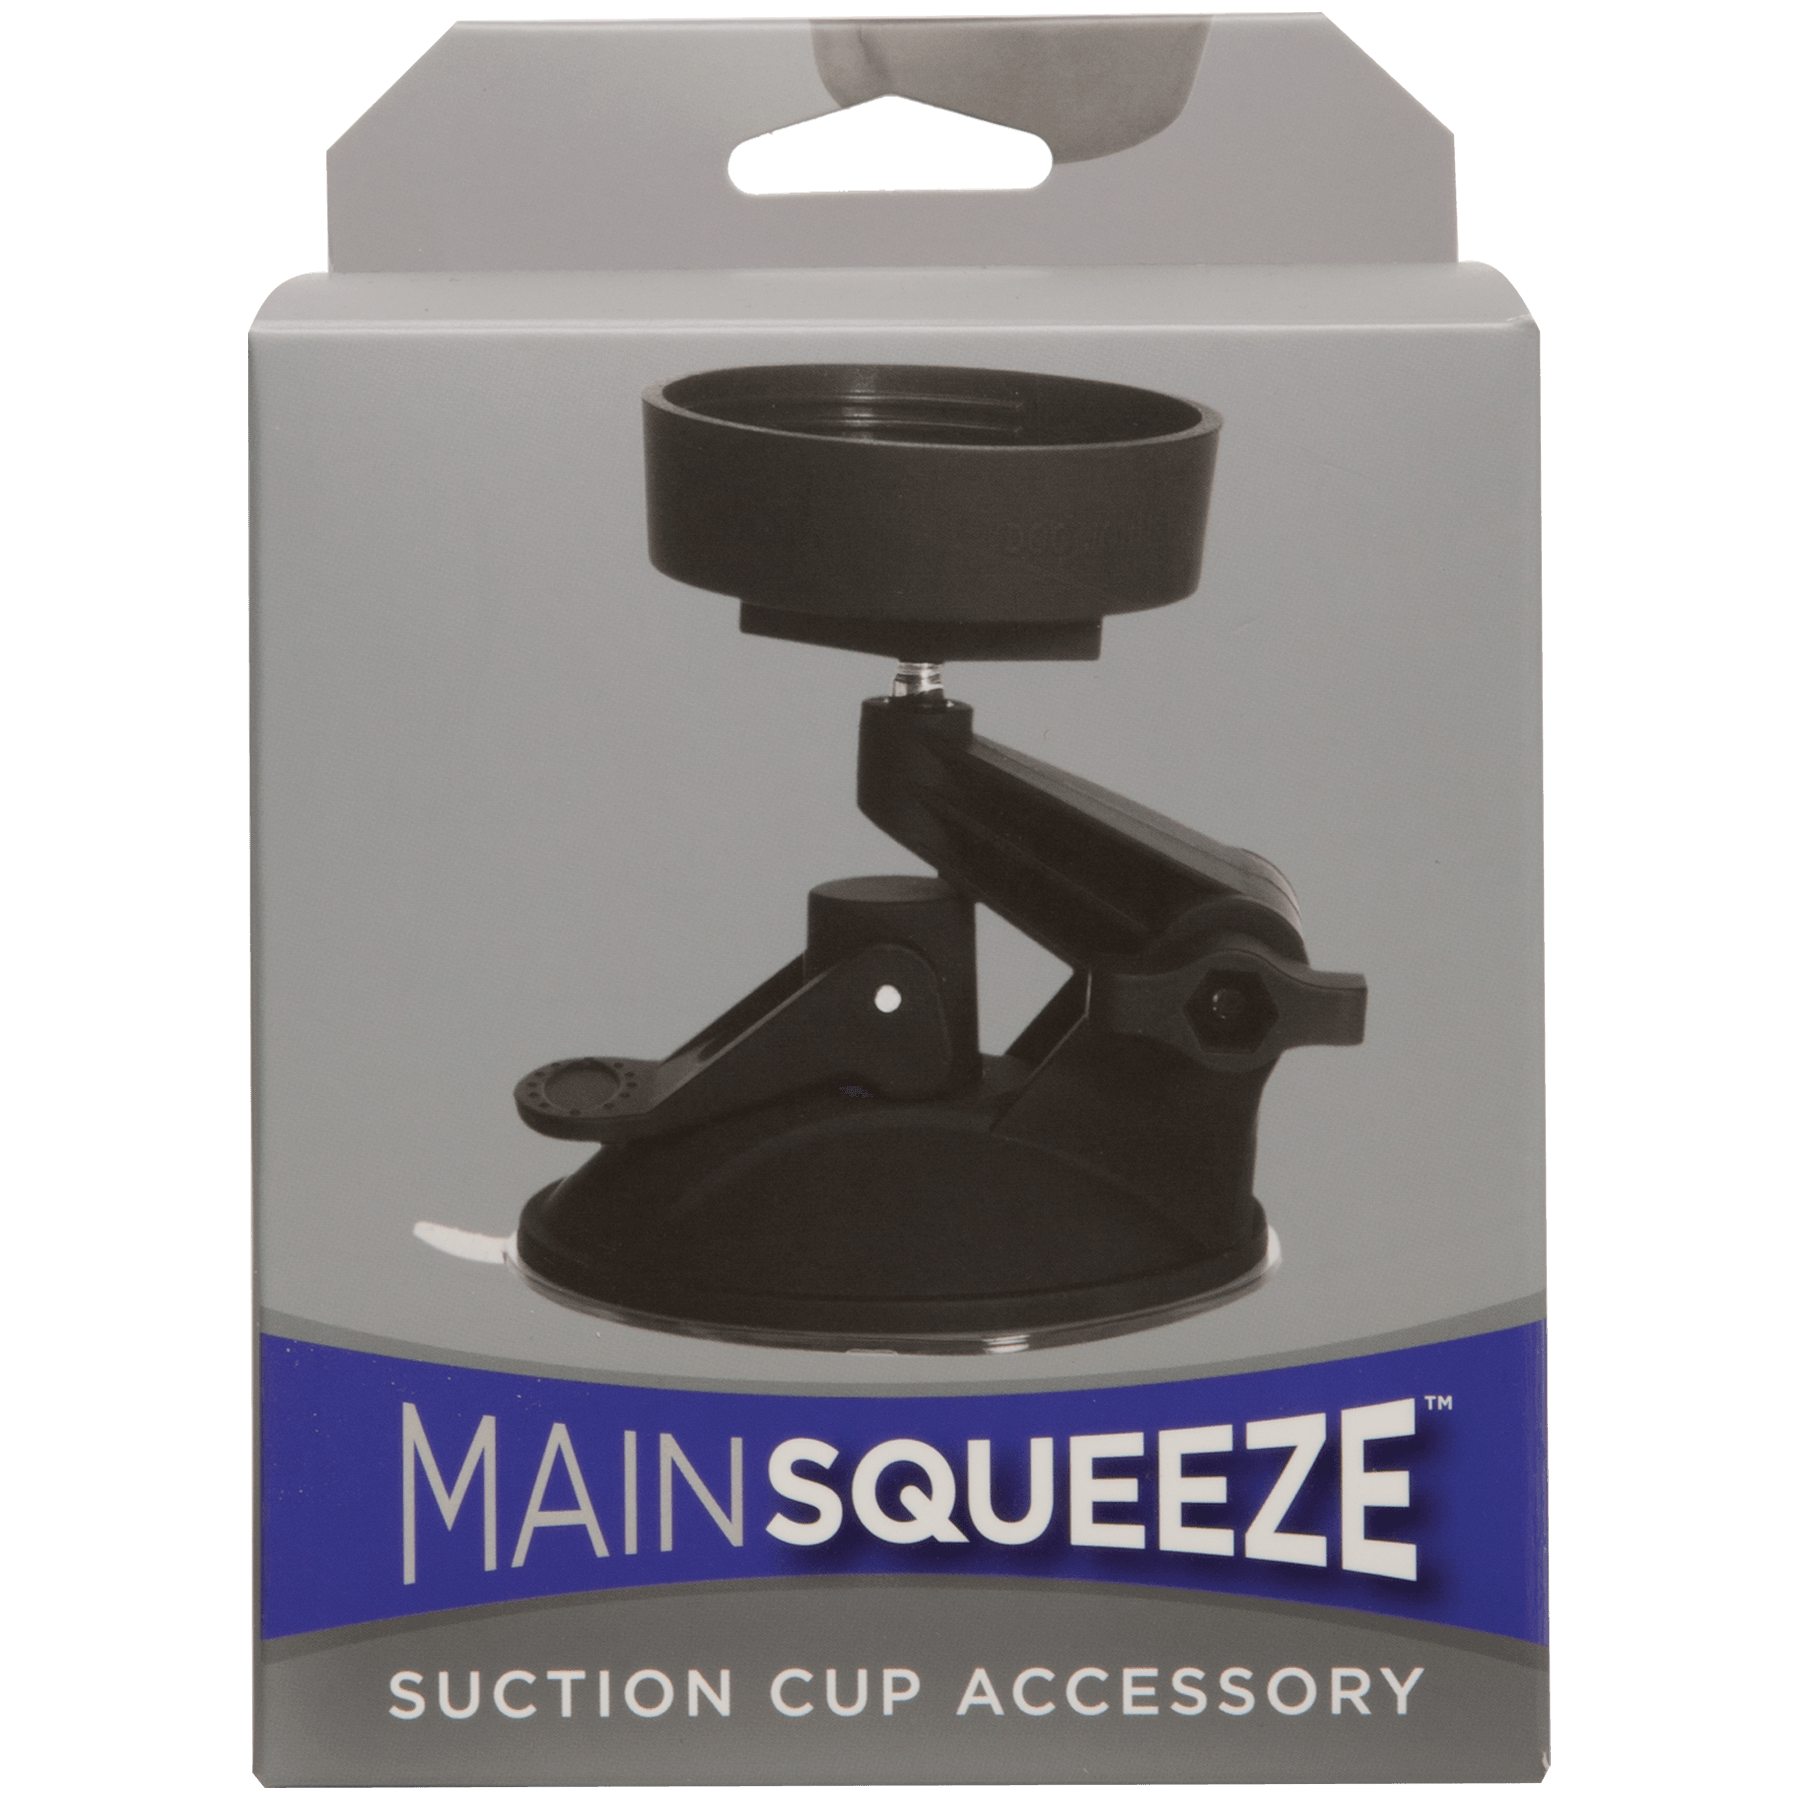 Doc Johnson Main Squeeze Suction Cup - Buy At Luxury Toy X - Free 3-Day Shipping